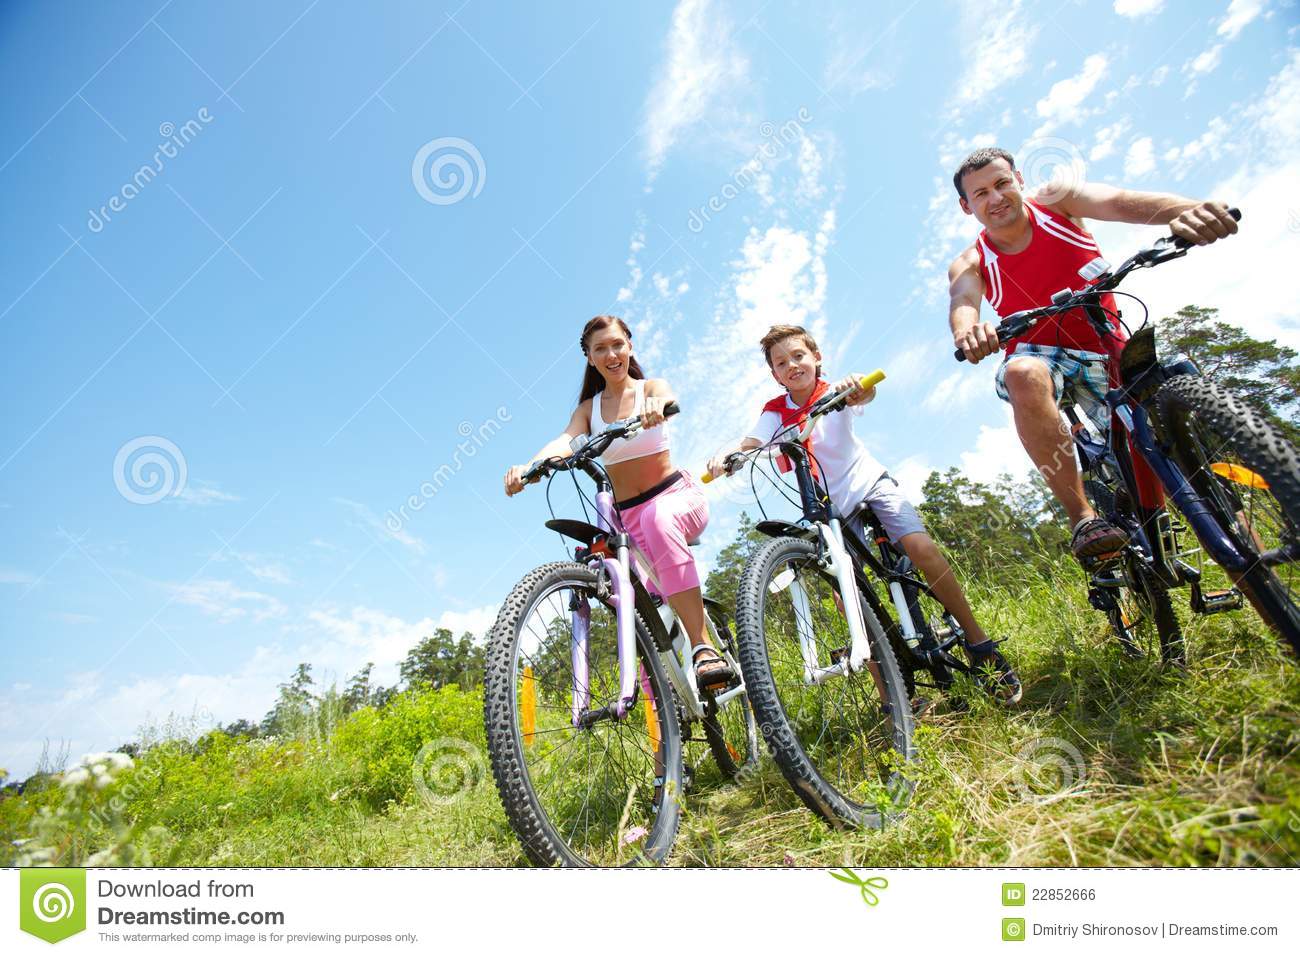 Spending Time With Family Royalty Free Stock Image   Image  22852666